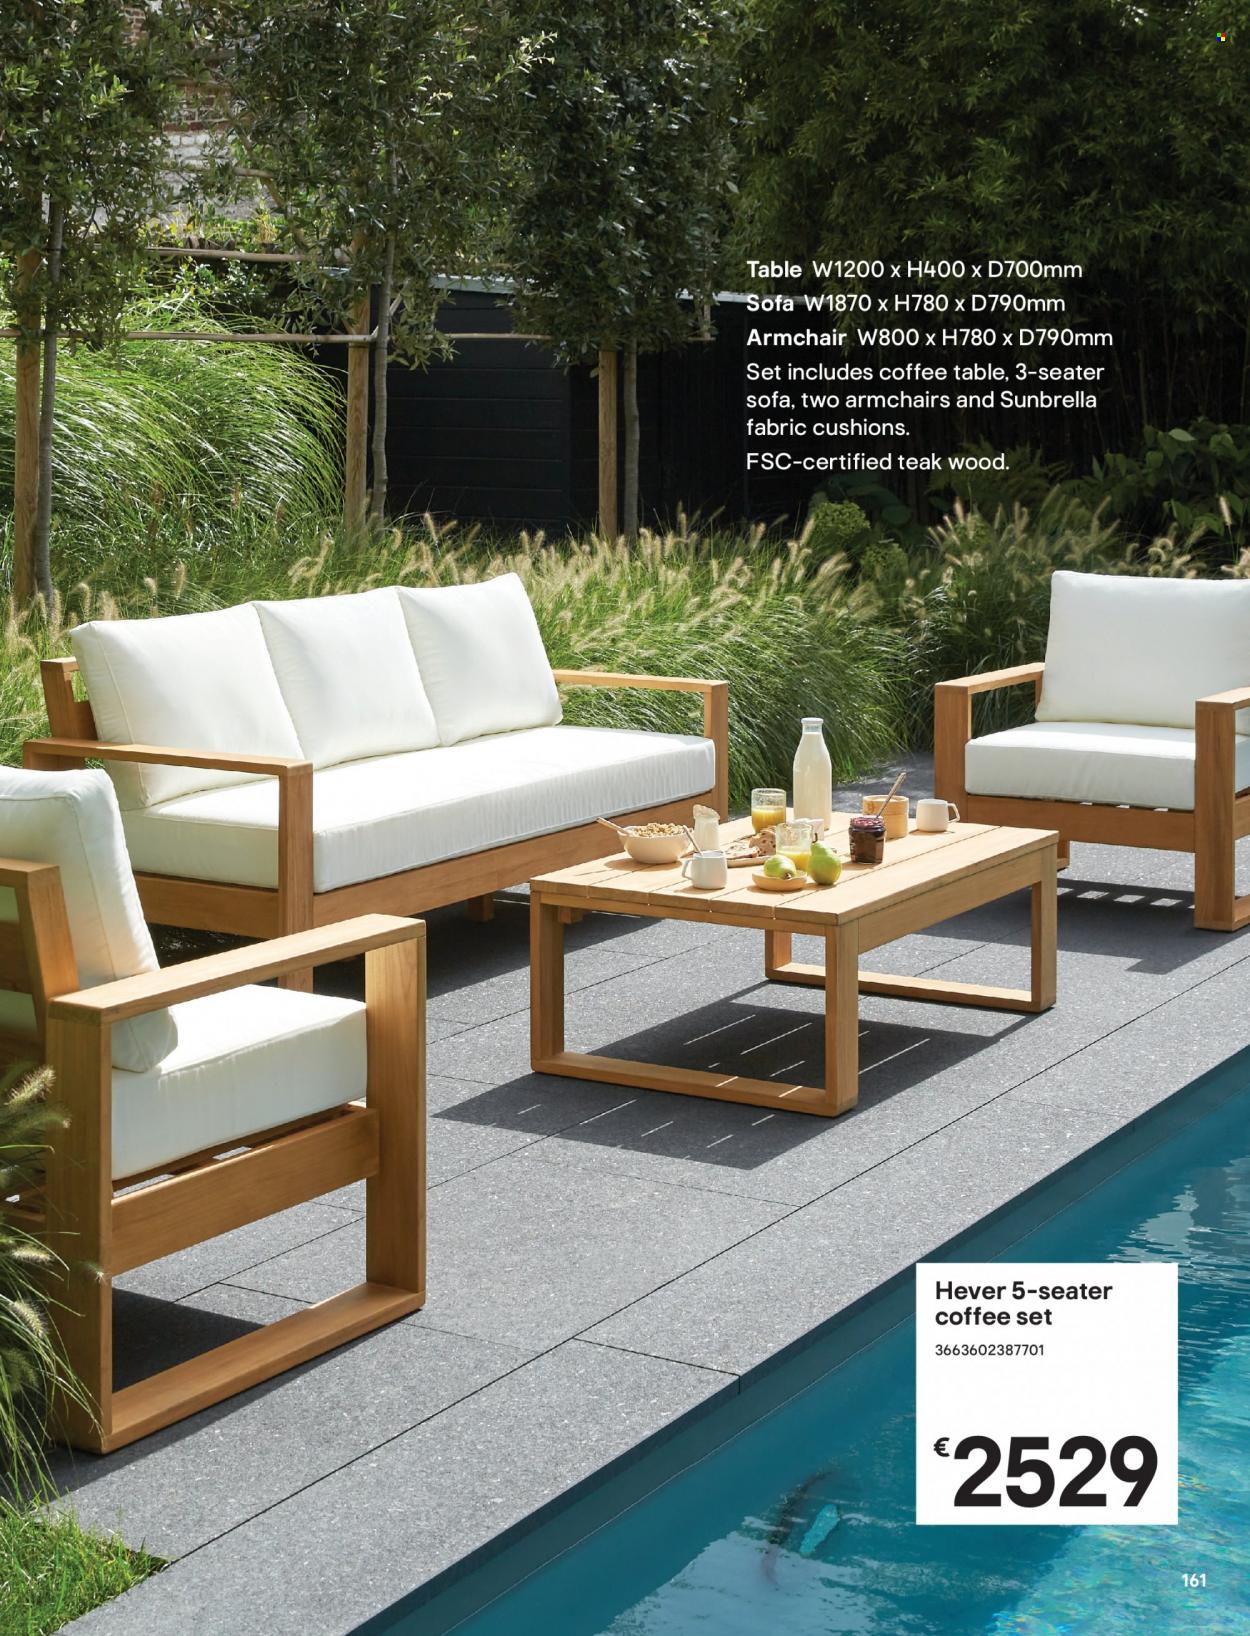 B&Q offer  - Sales products - table, arm chair, sofa, coffee table, cushion. Page 161.